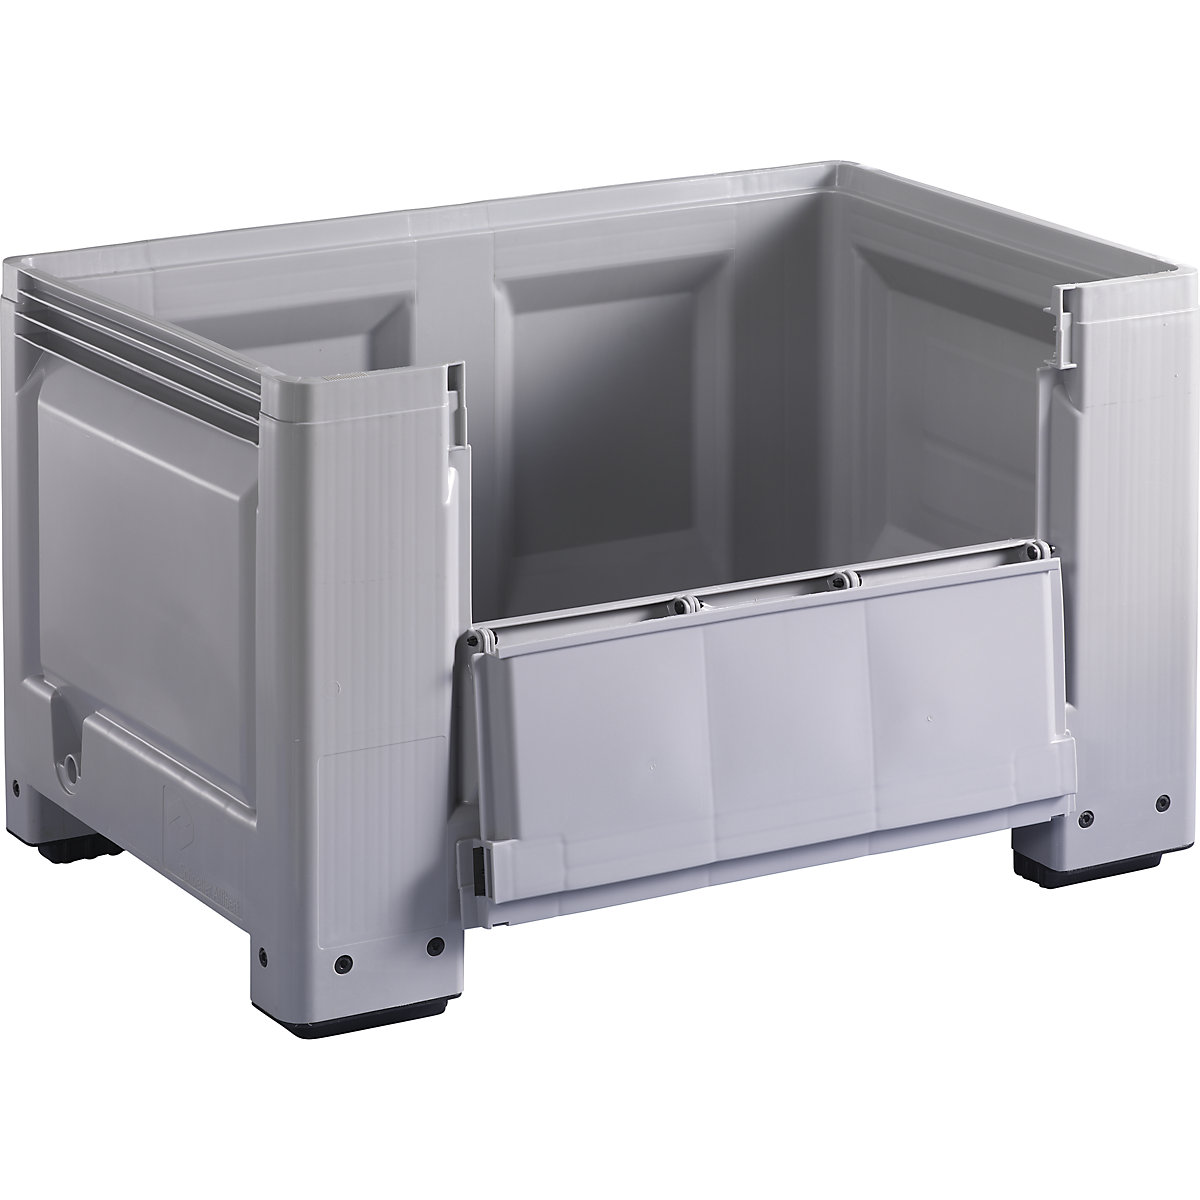 Pallet box, standard version, capacity 535 l, model with 4 feet, 1 side flap-4